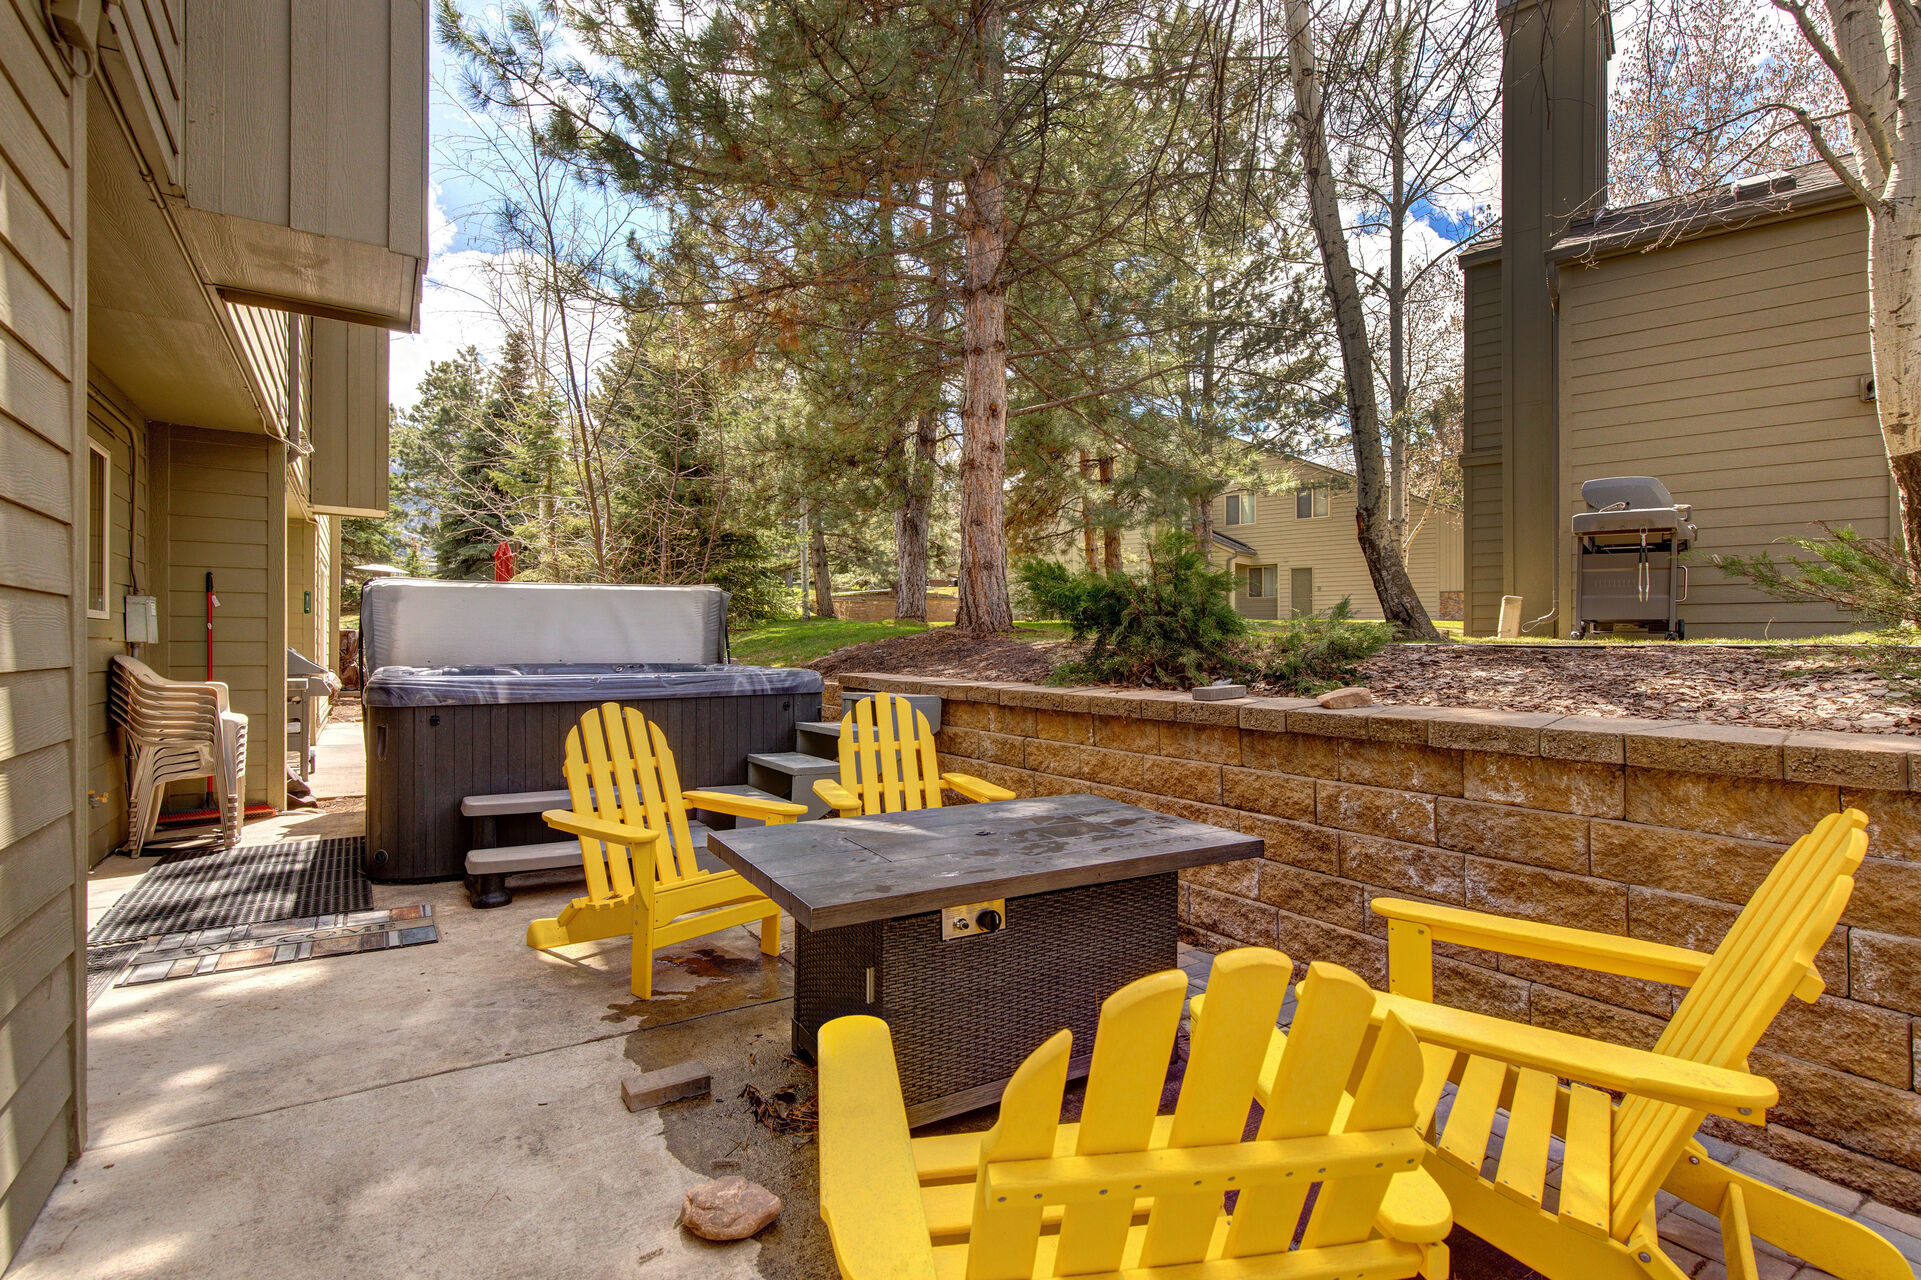 Private back patio with hot tub, seating for four, fire pit, and BBQ grill